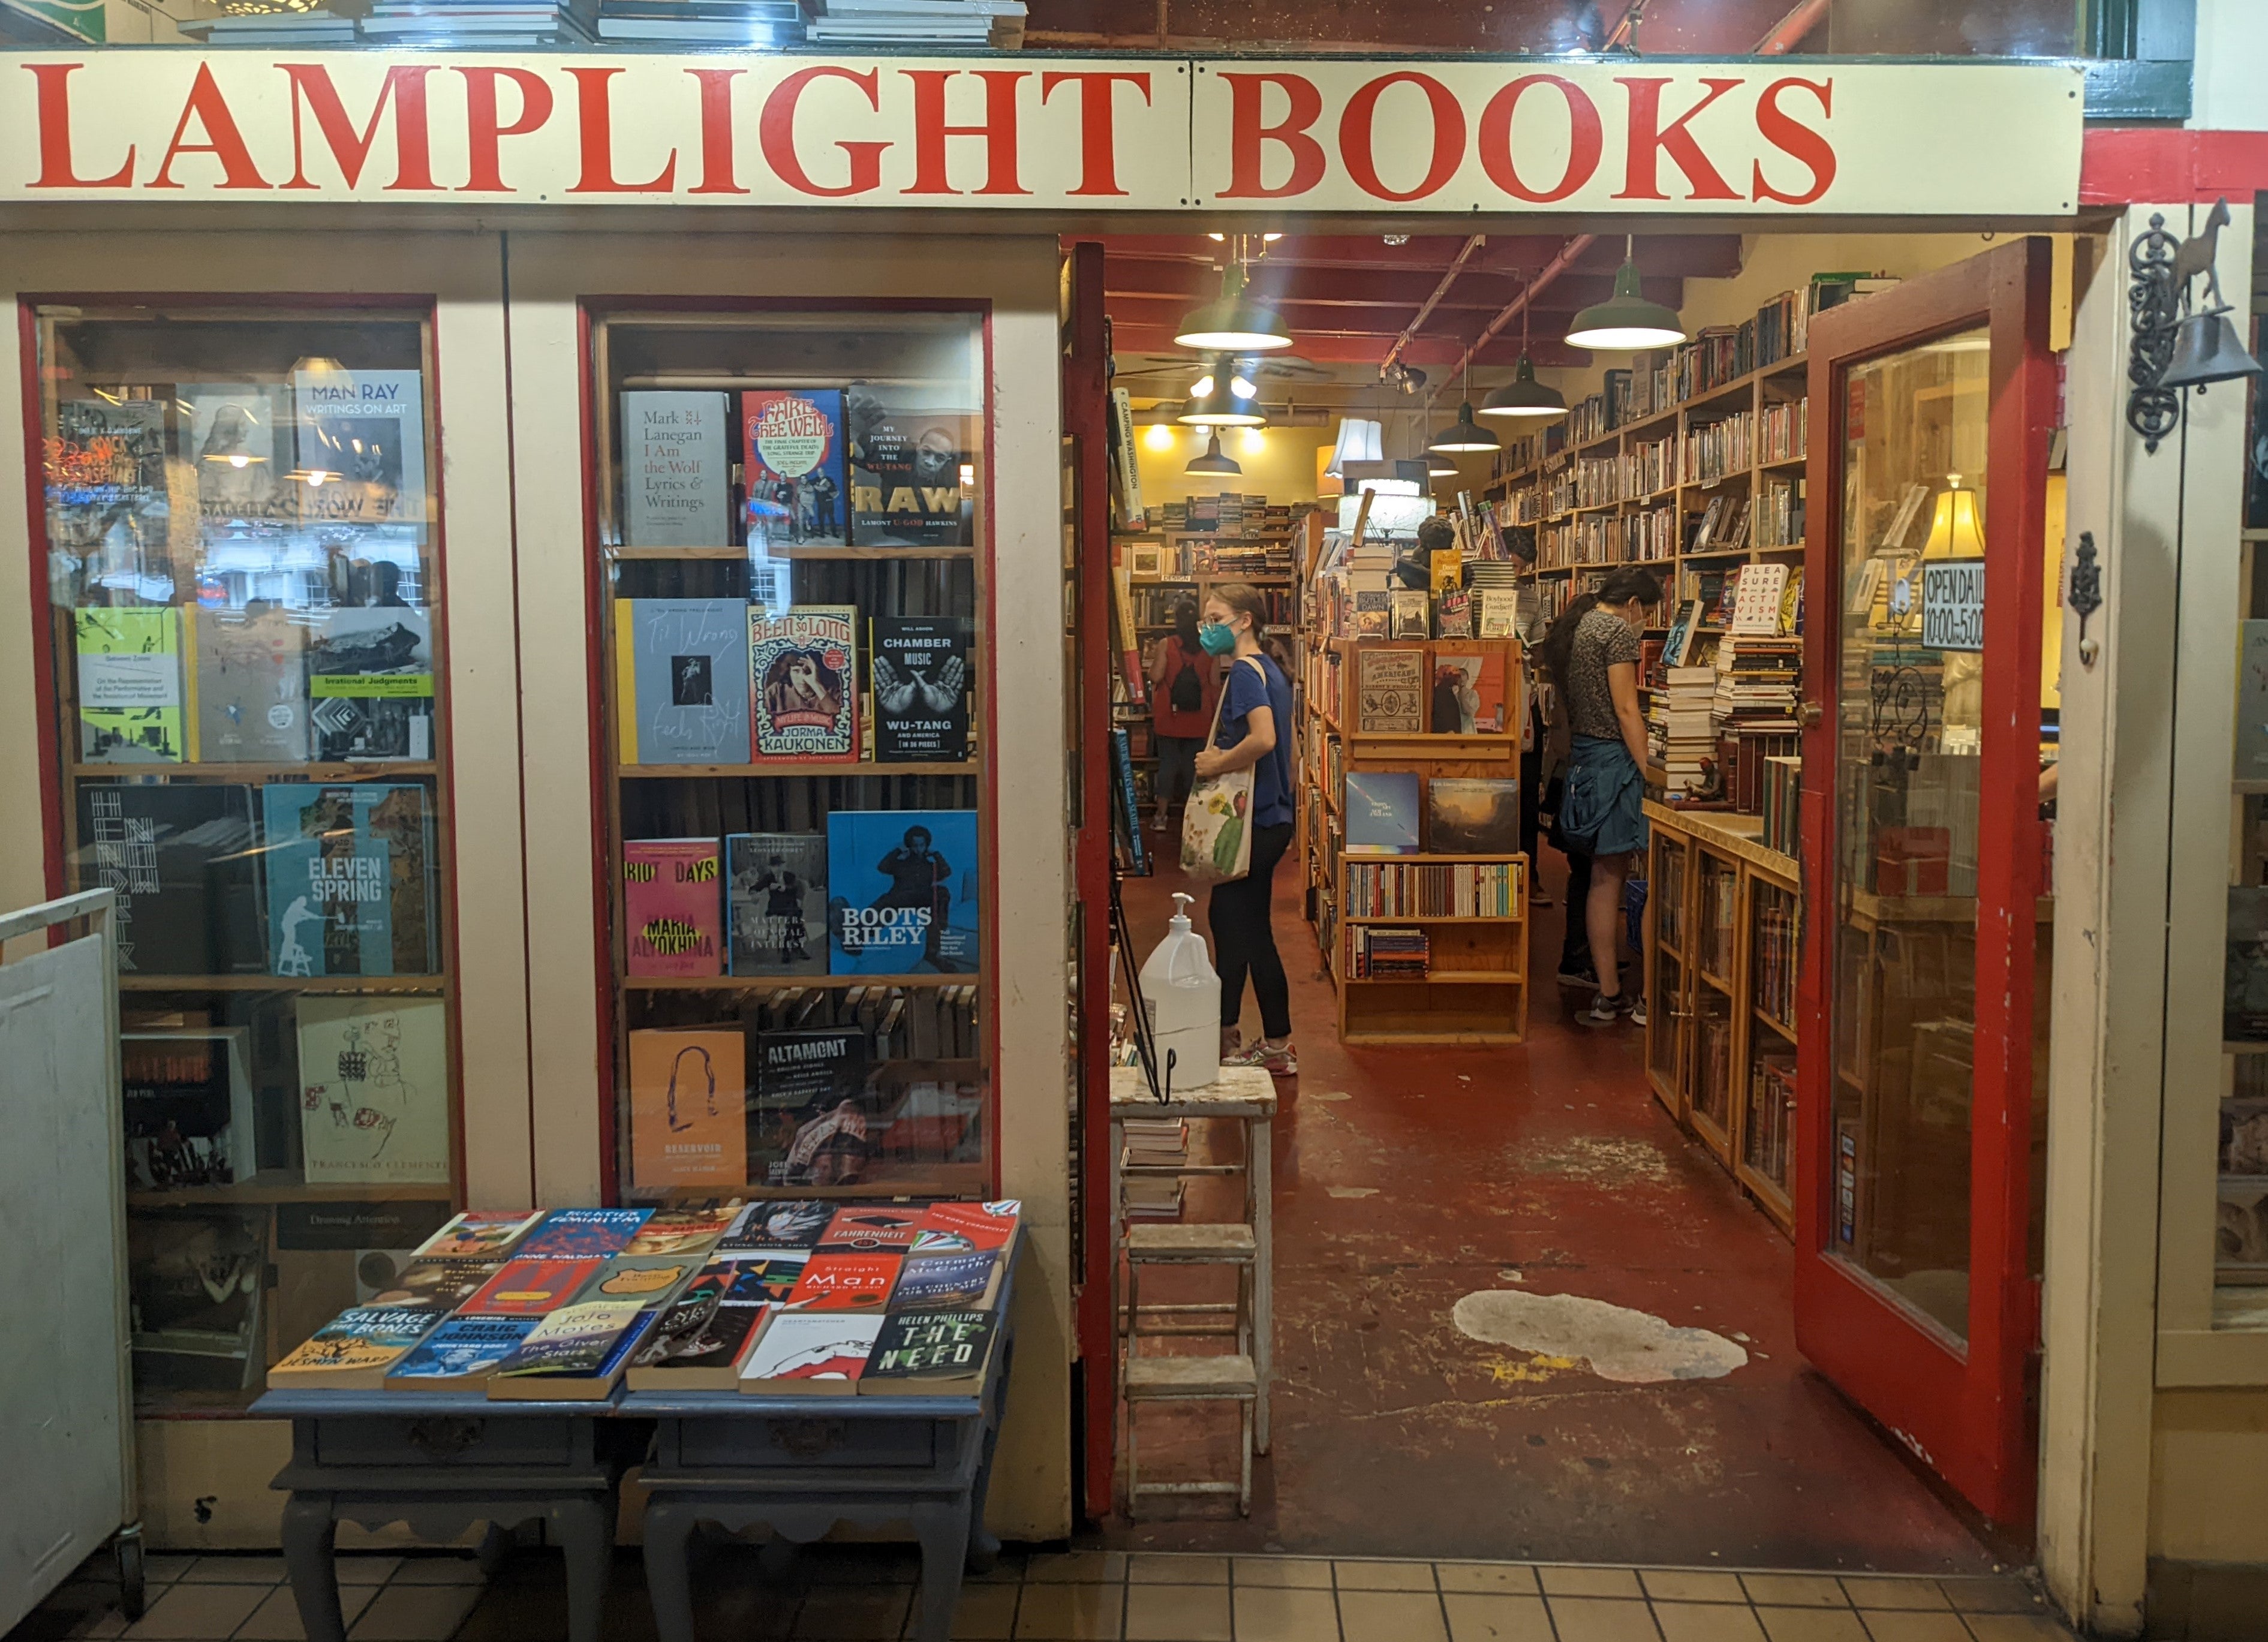 Photograph of a bookstore with a sign that reads Lamplight Books